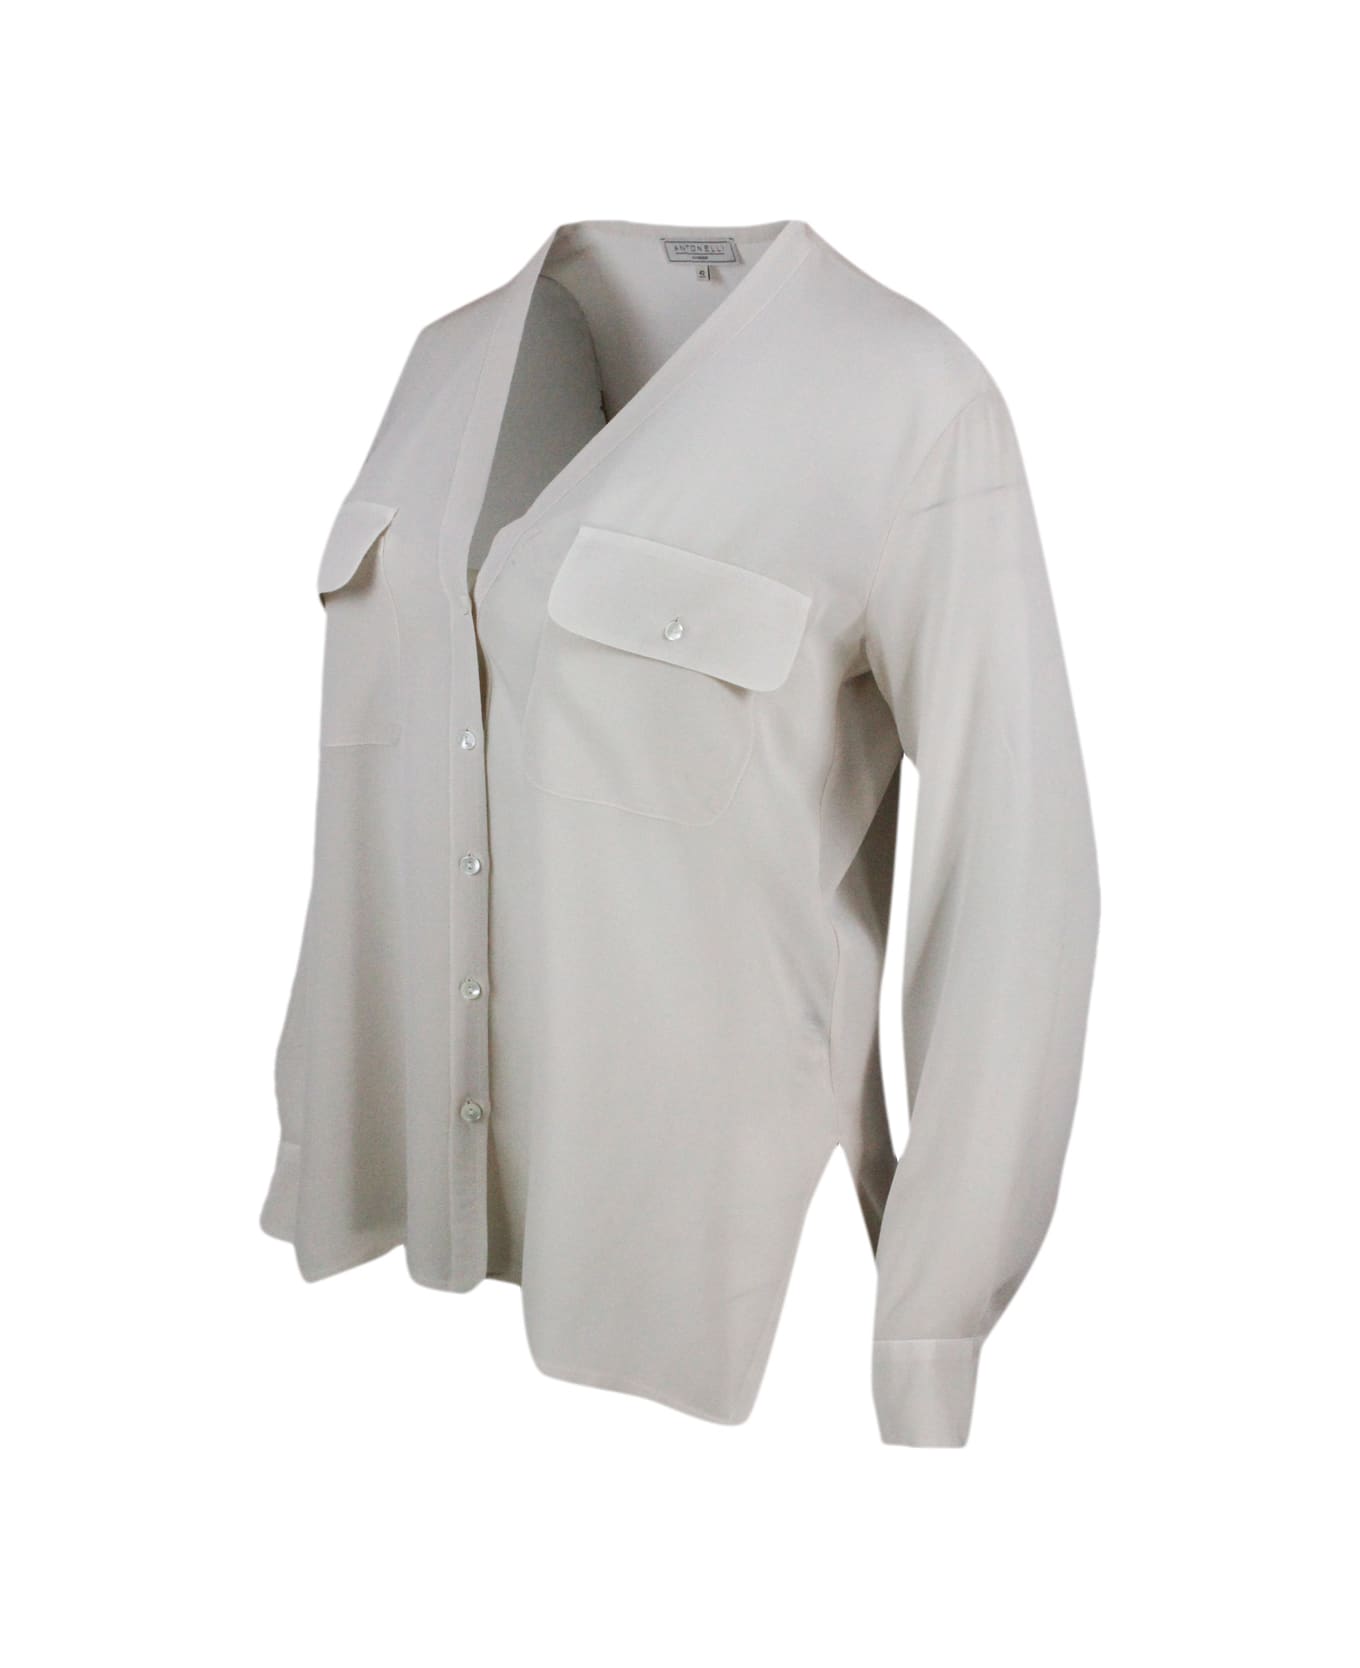 Antonelli Shirt Made Of Soft Stretch zip-up, With V-neck, WORLD Pockets And Button Closure - Beige